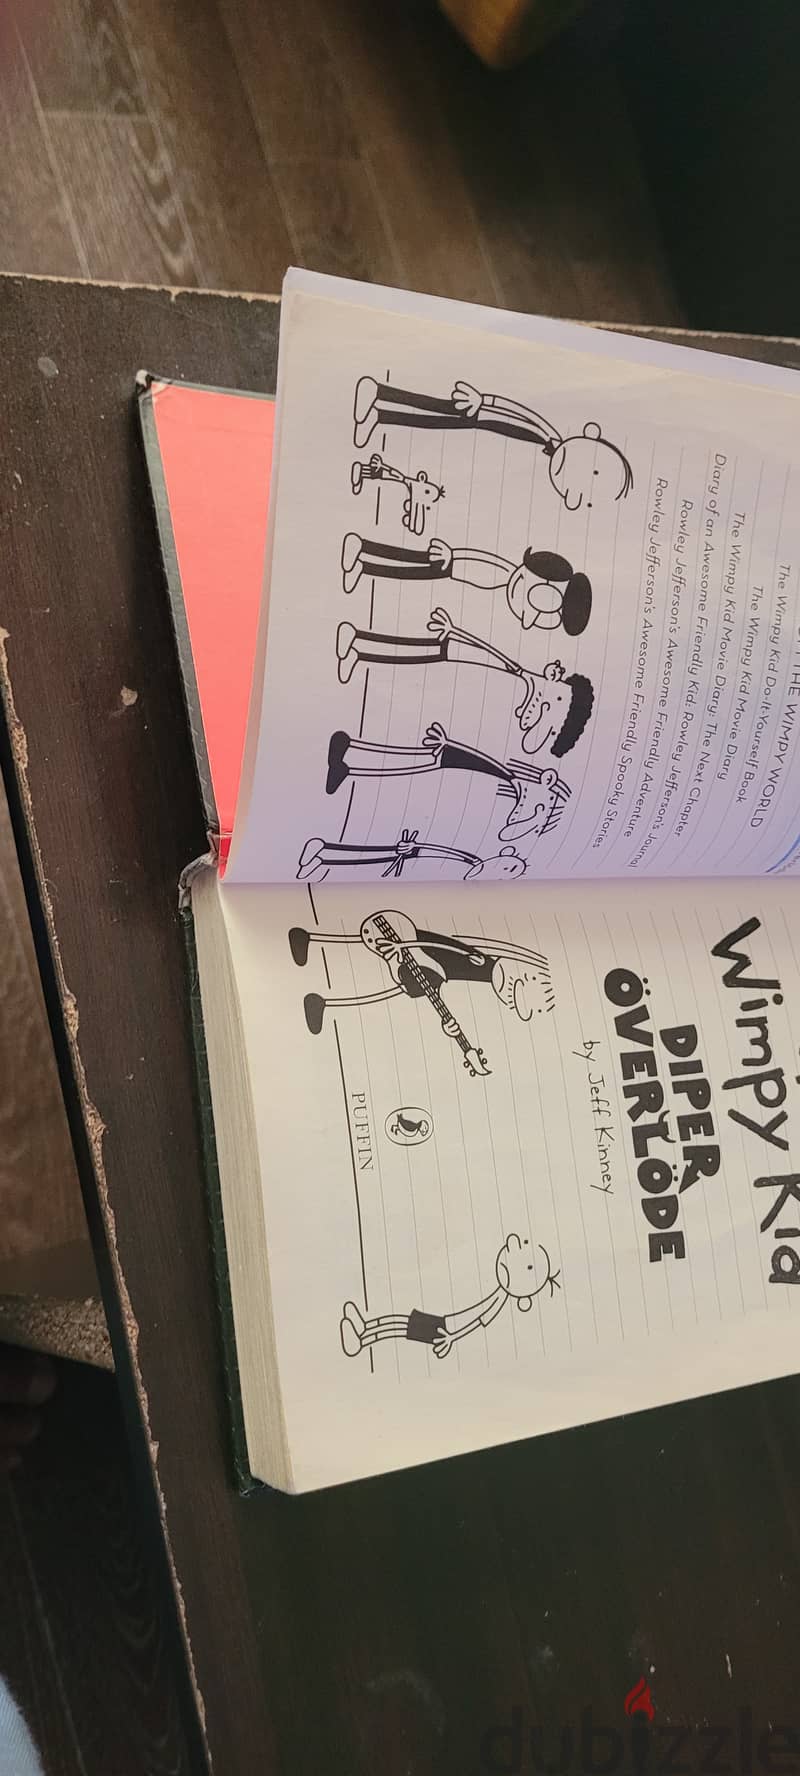 Diary of a wimpy kid Diper overlode 2